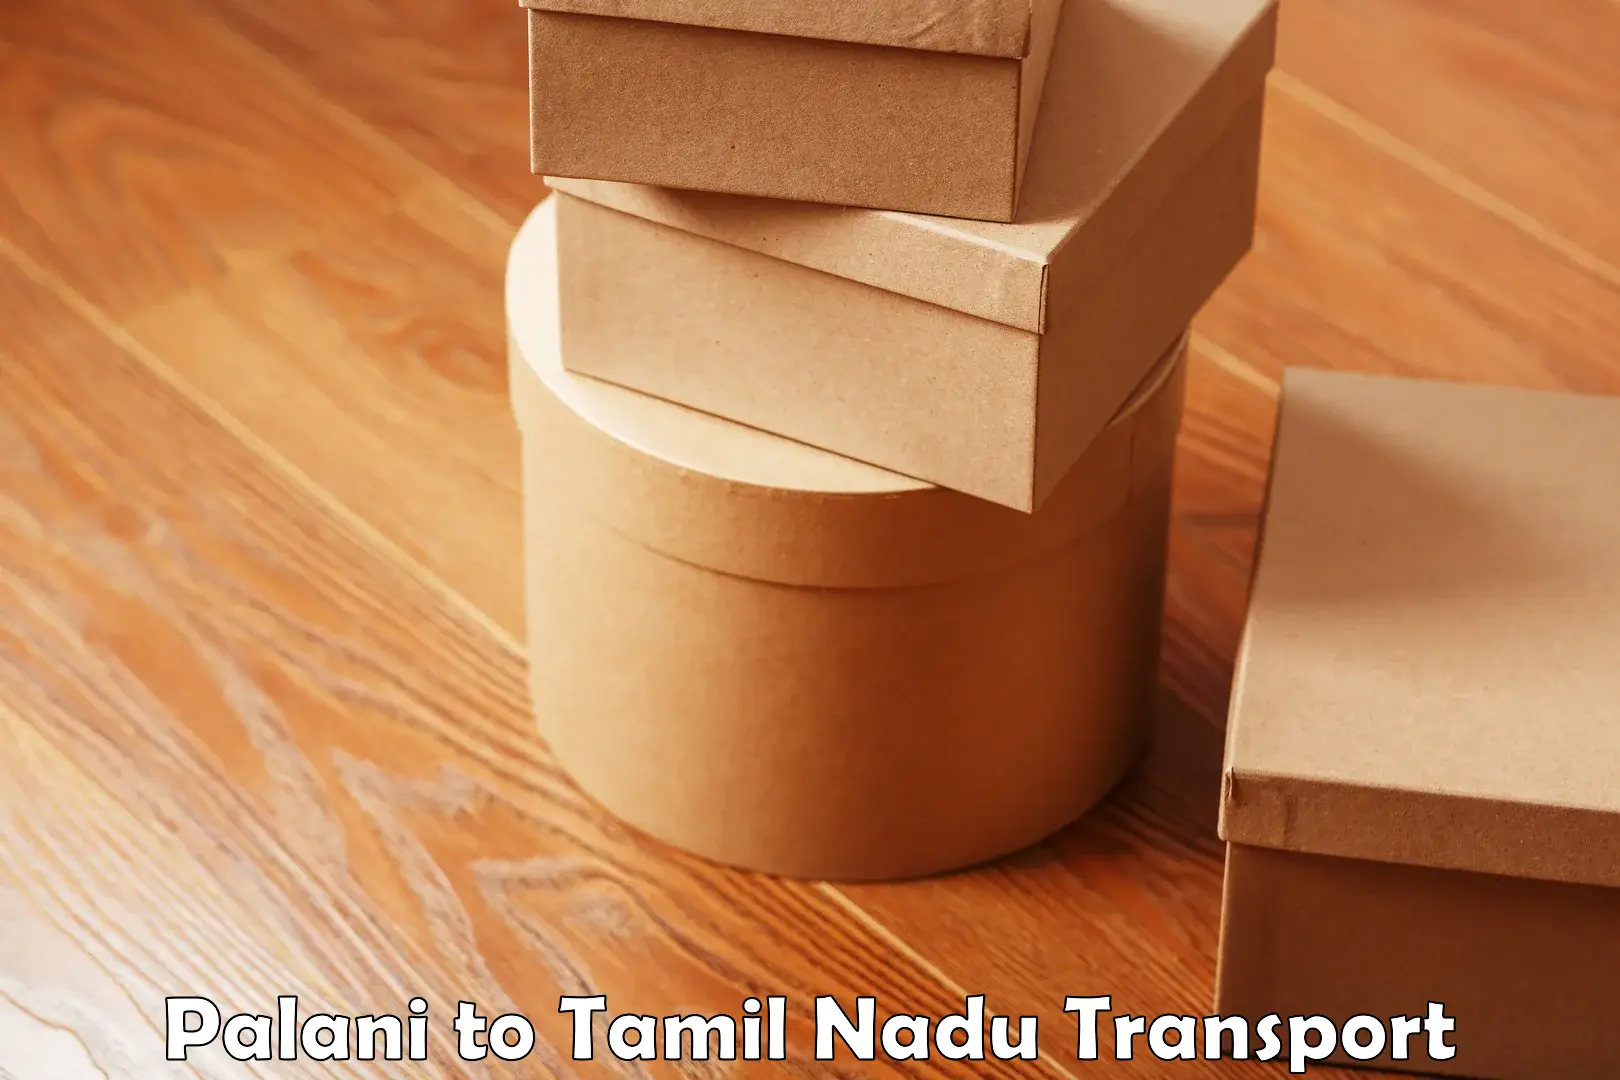 Pick up transport service in Palani to Ennore Port Chennai